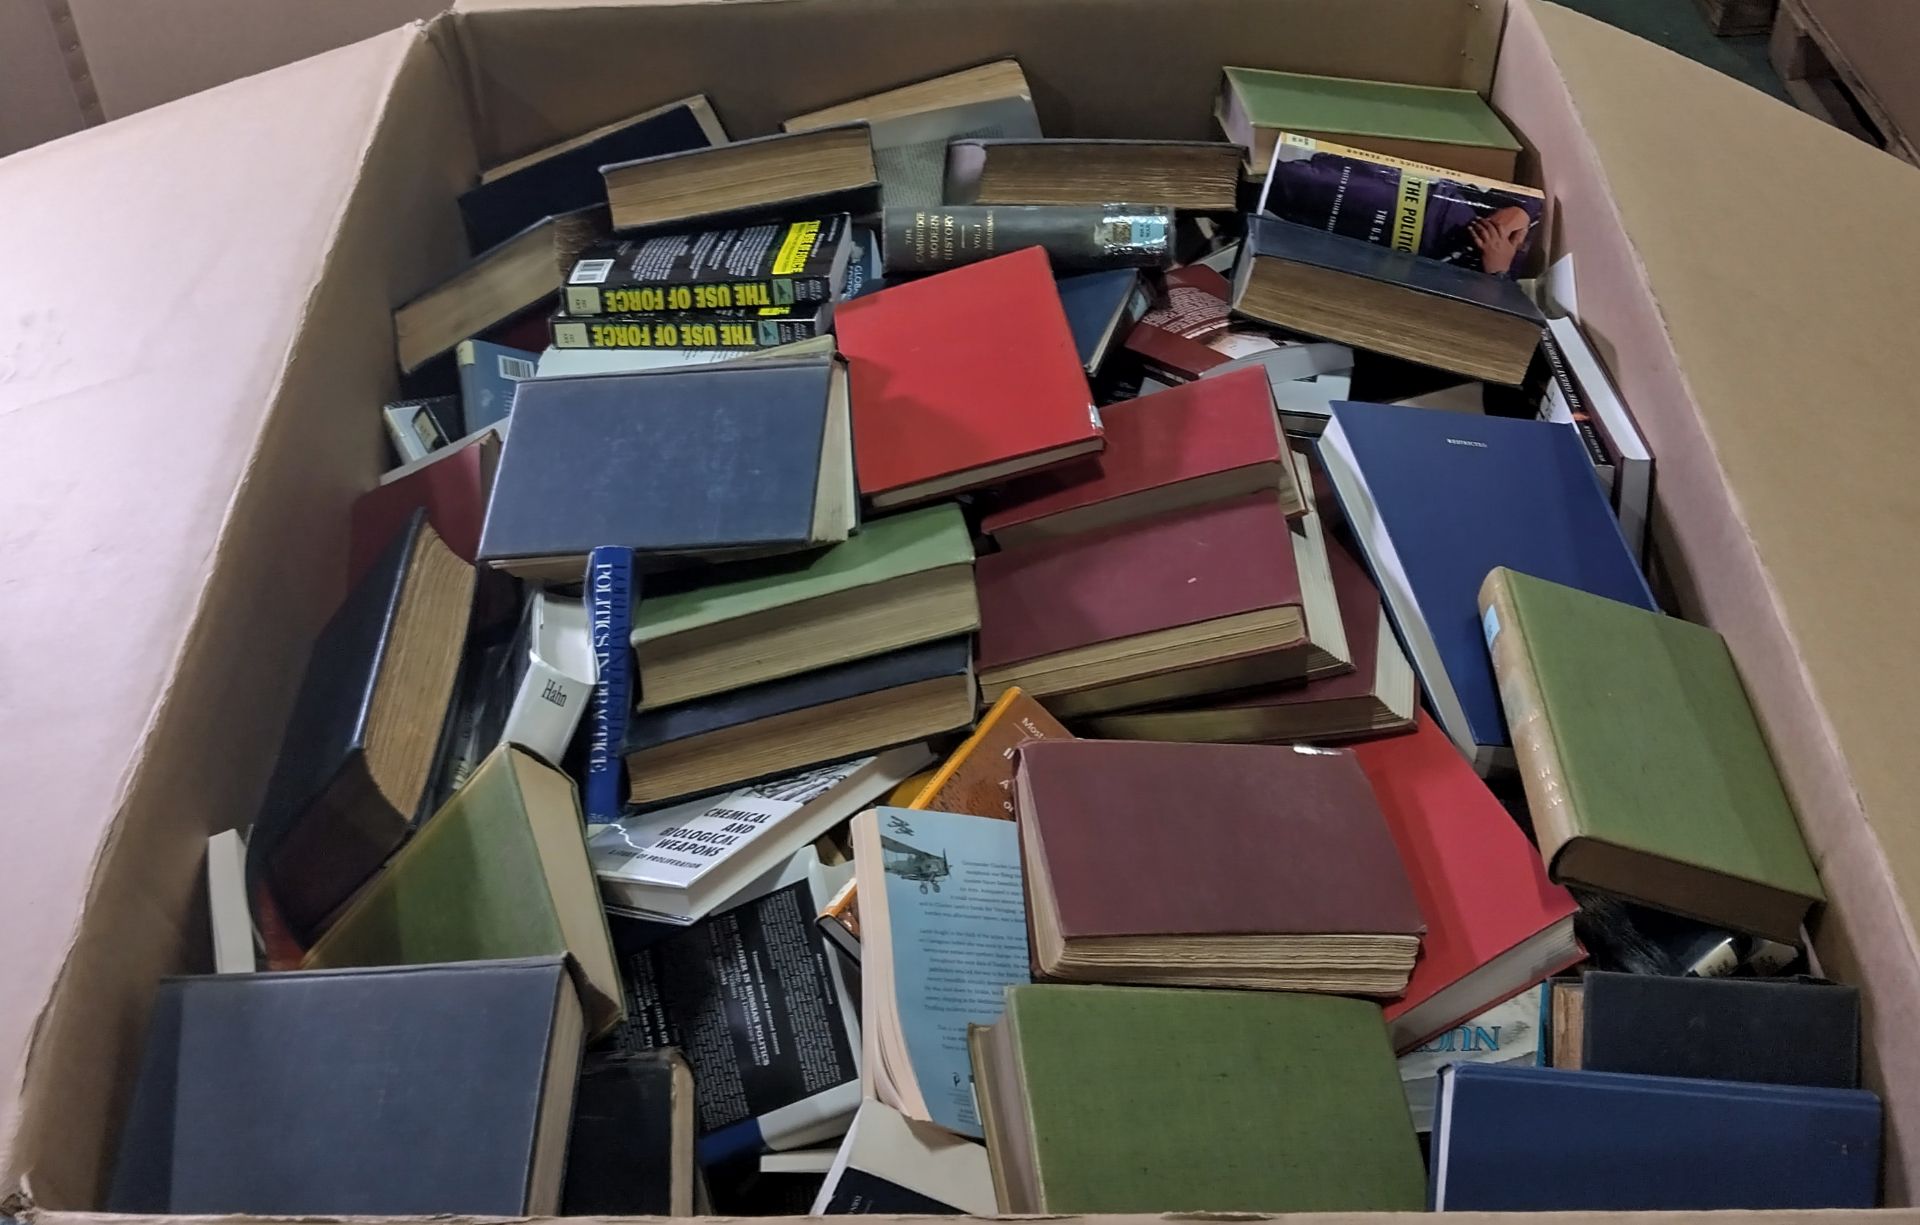 2x Pallet sized boxes of books - Fictional, Non-fictional, Military, mixed genre - Image 2 of 11